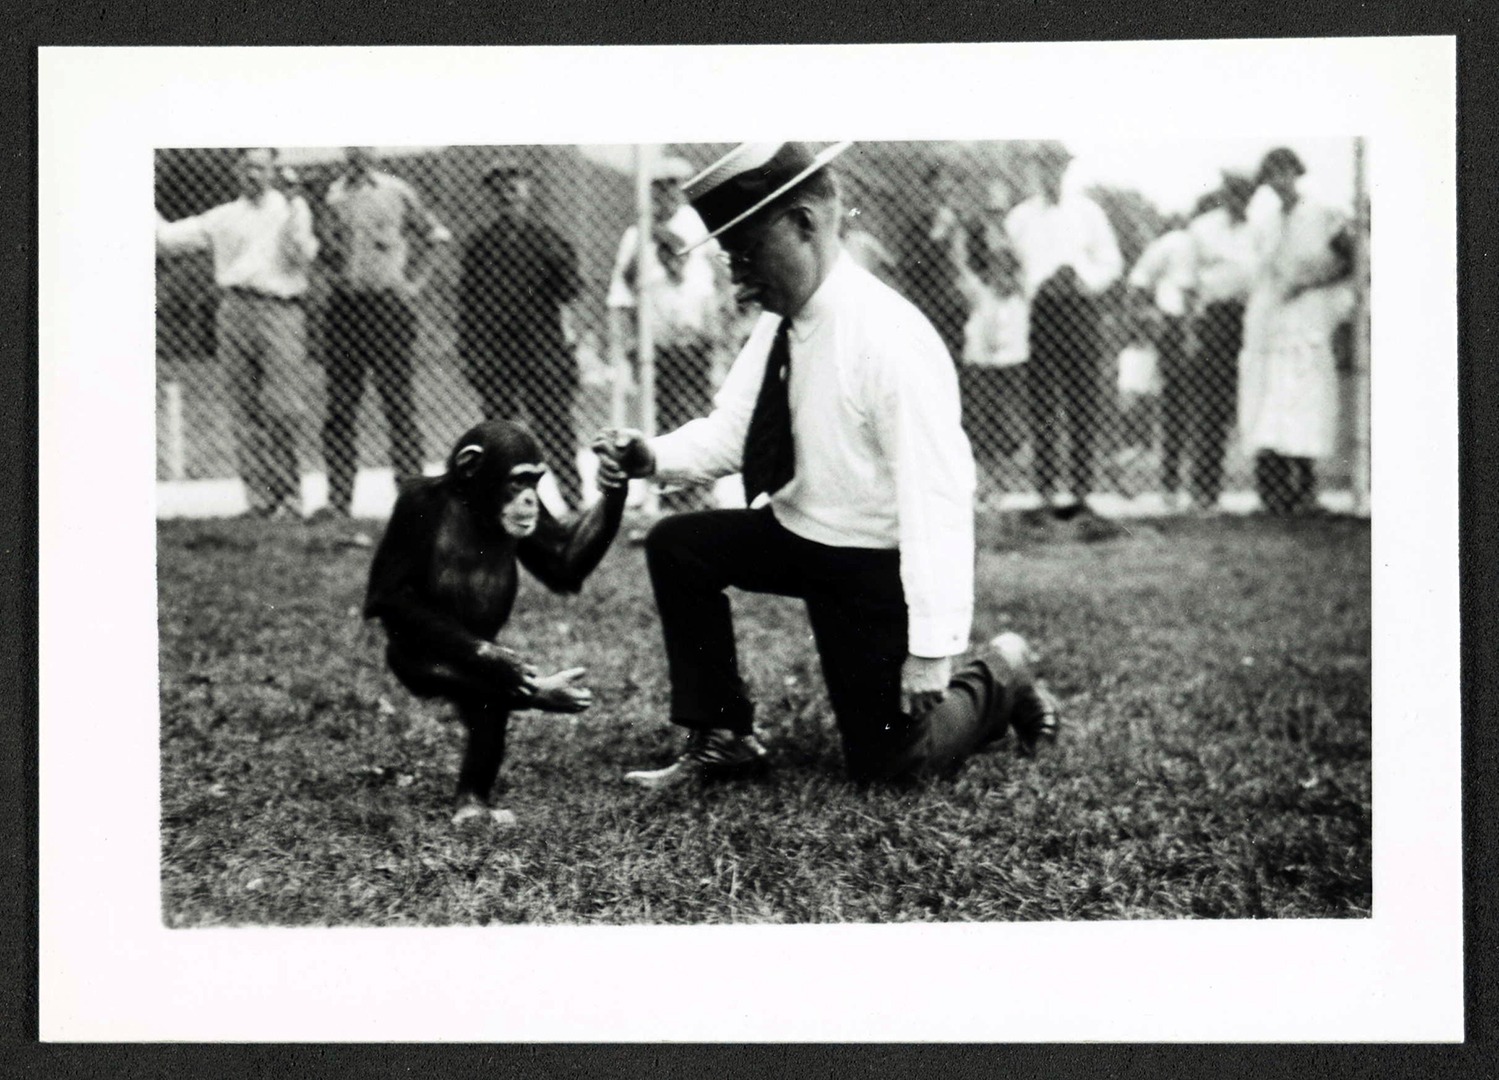 Zoo director Alfred Park with chimpanzee Skippy, 1920